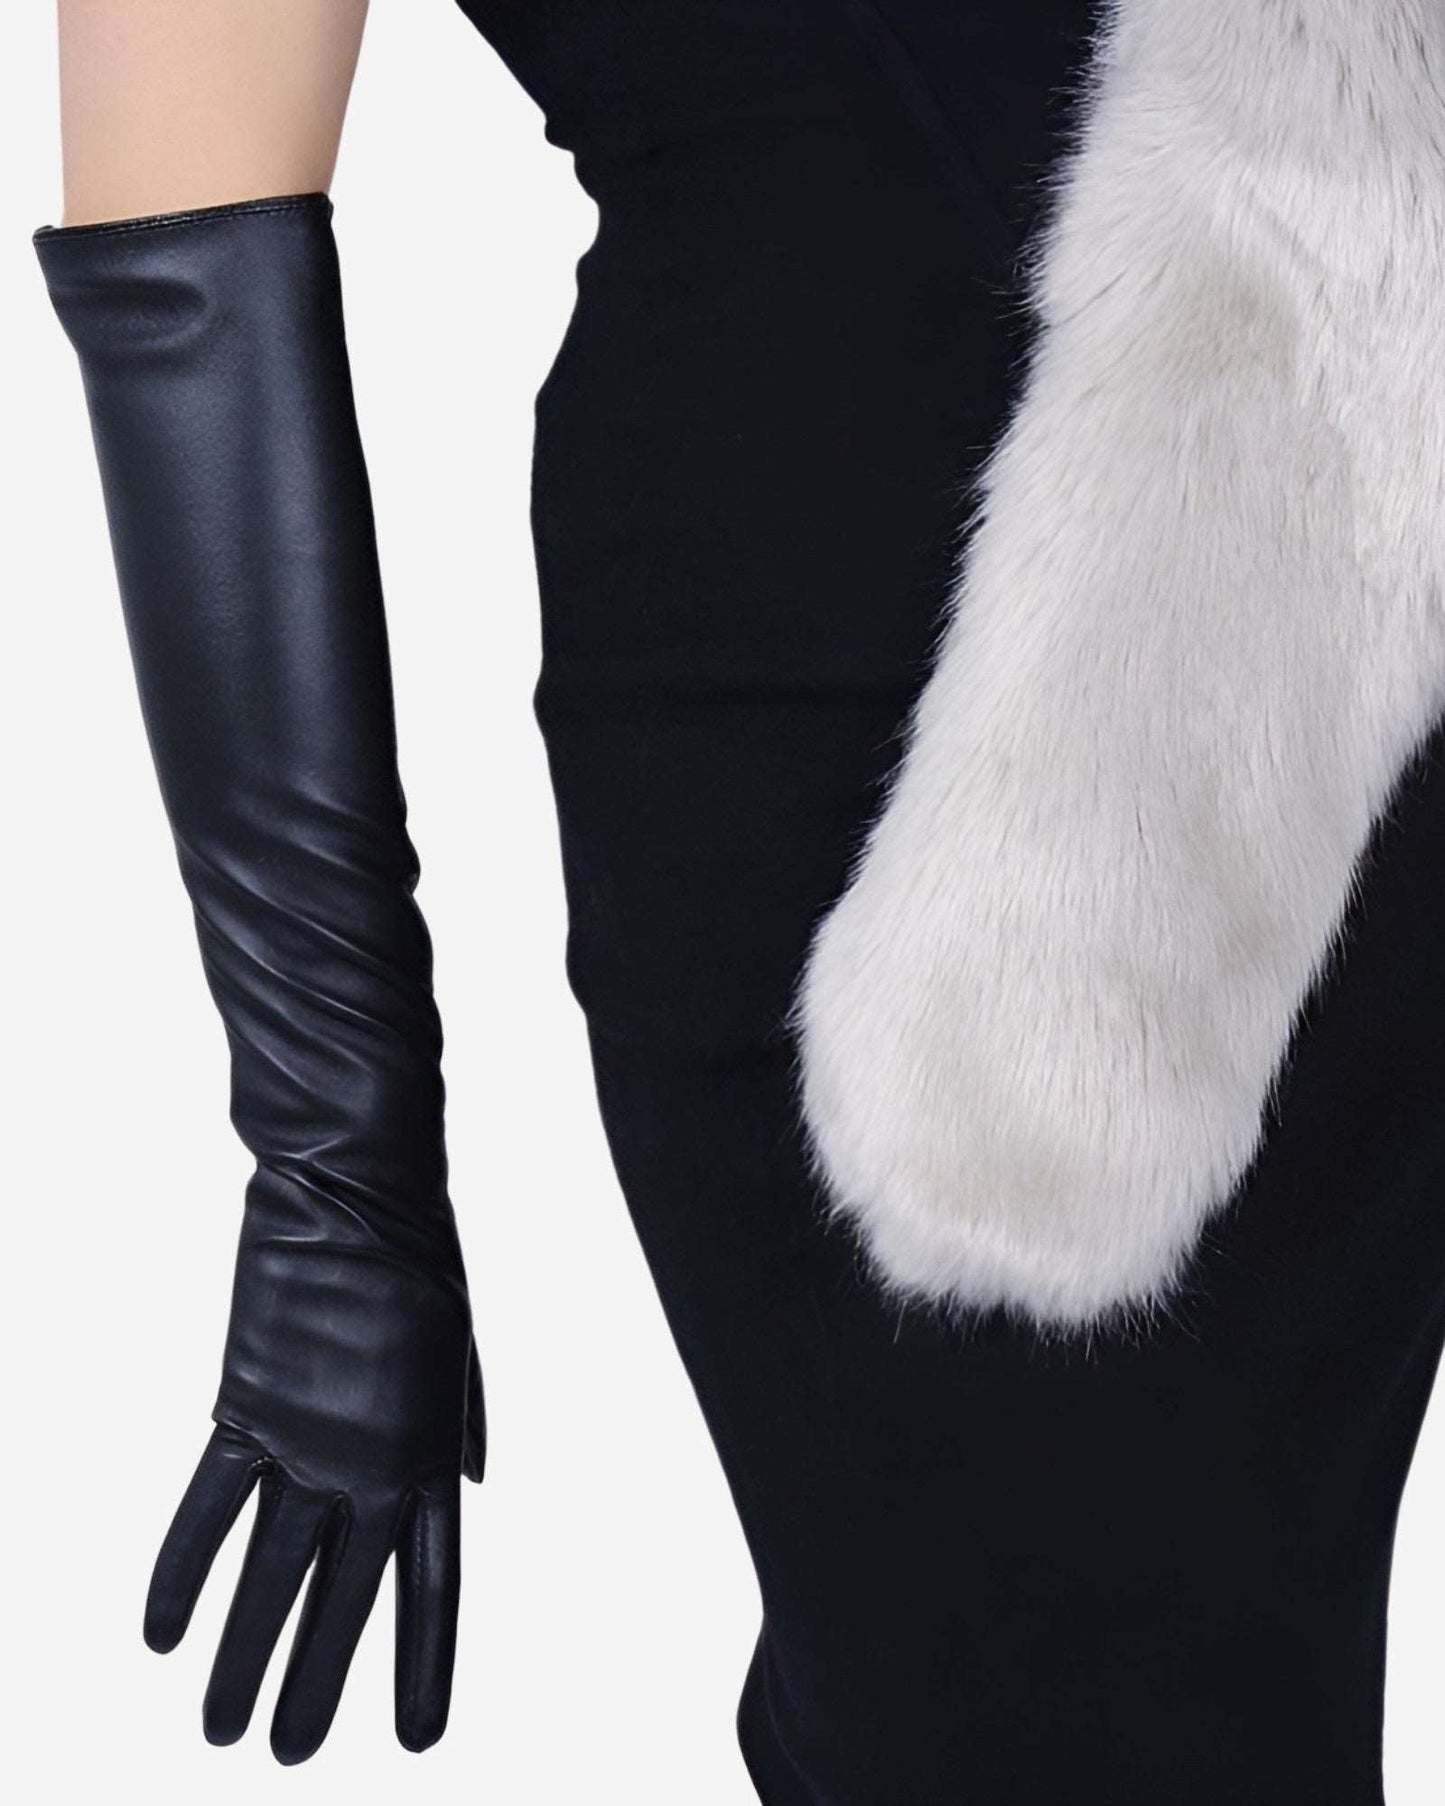 Leather Gloves Sensual Long Genuine Leather Gloves